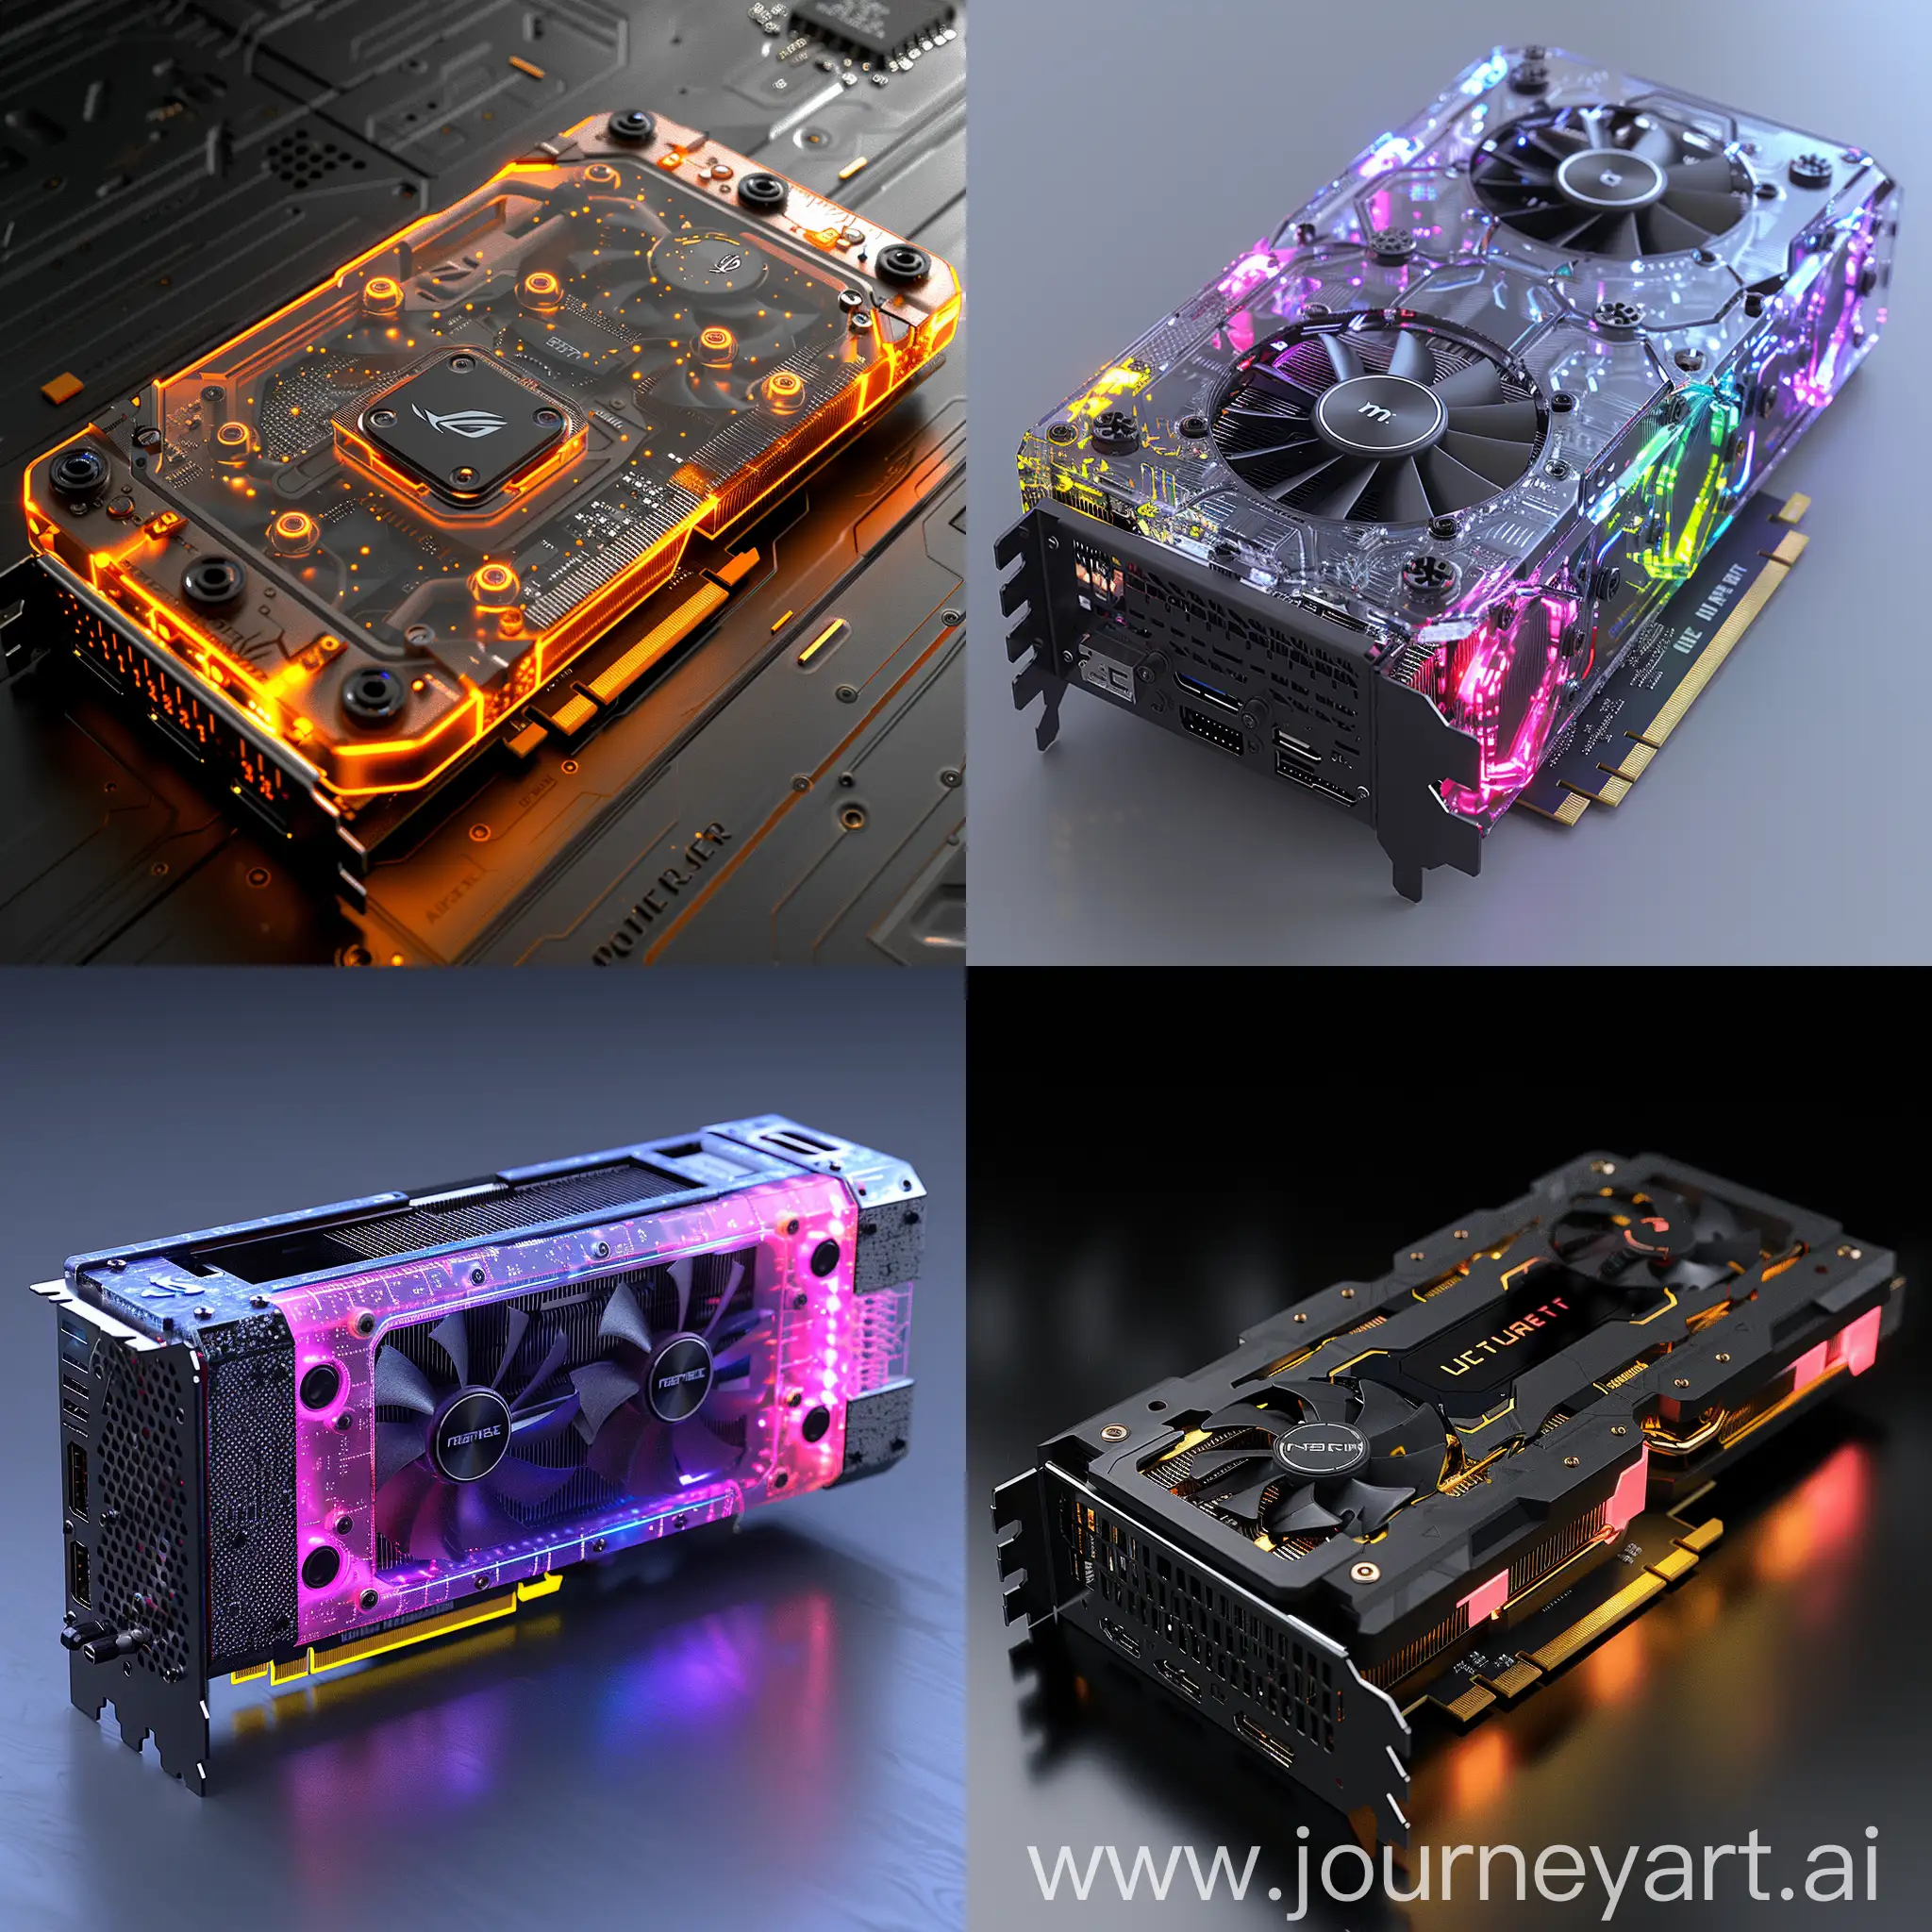 Futuristic-PC-Graphics-Card-with-Quantum-Computing-Integration-and-RealTime-Ray-Tracing